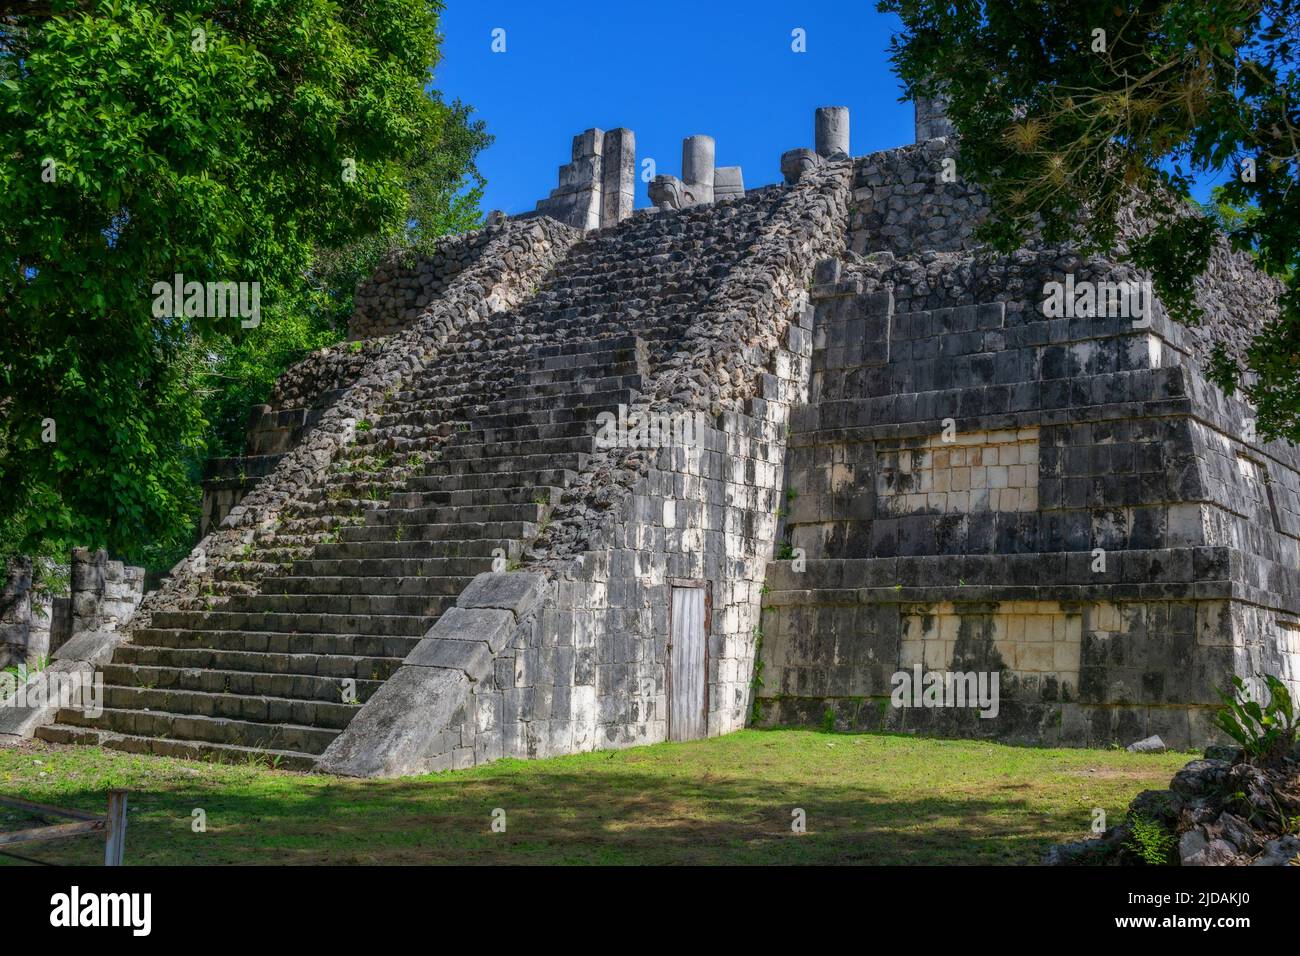 Temple of the warriors. Chichen Itza. Mayan archaeological complex located in Mexico, in the north of the Yucatán peninsula. Stock Photo